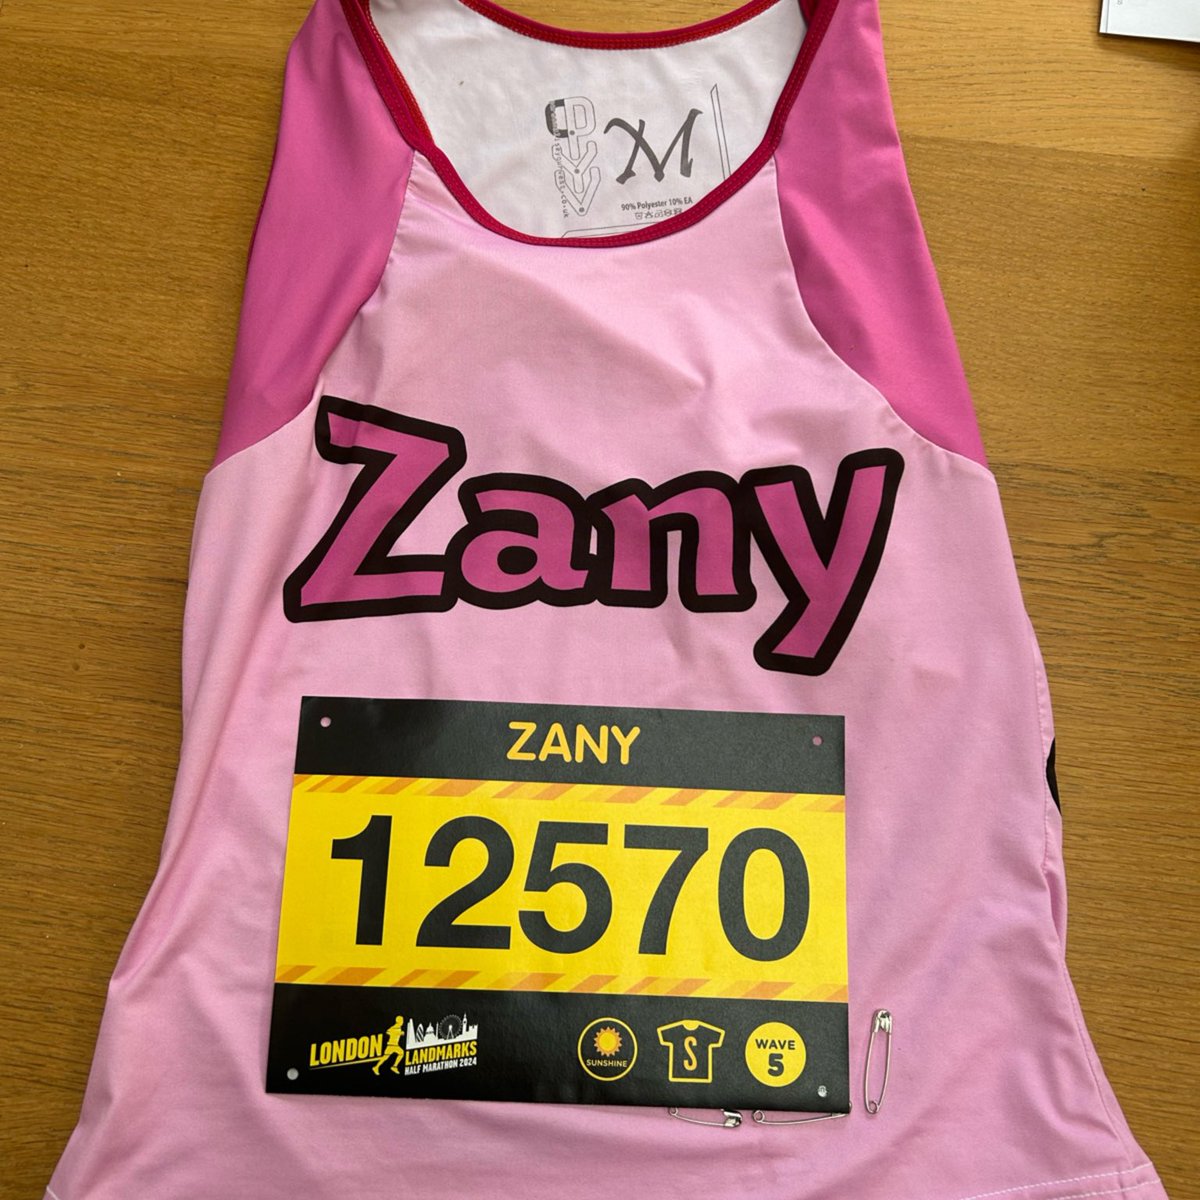 #LLHM24 race day!! Here I come. See you at the finish line